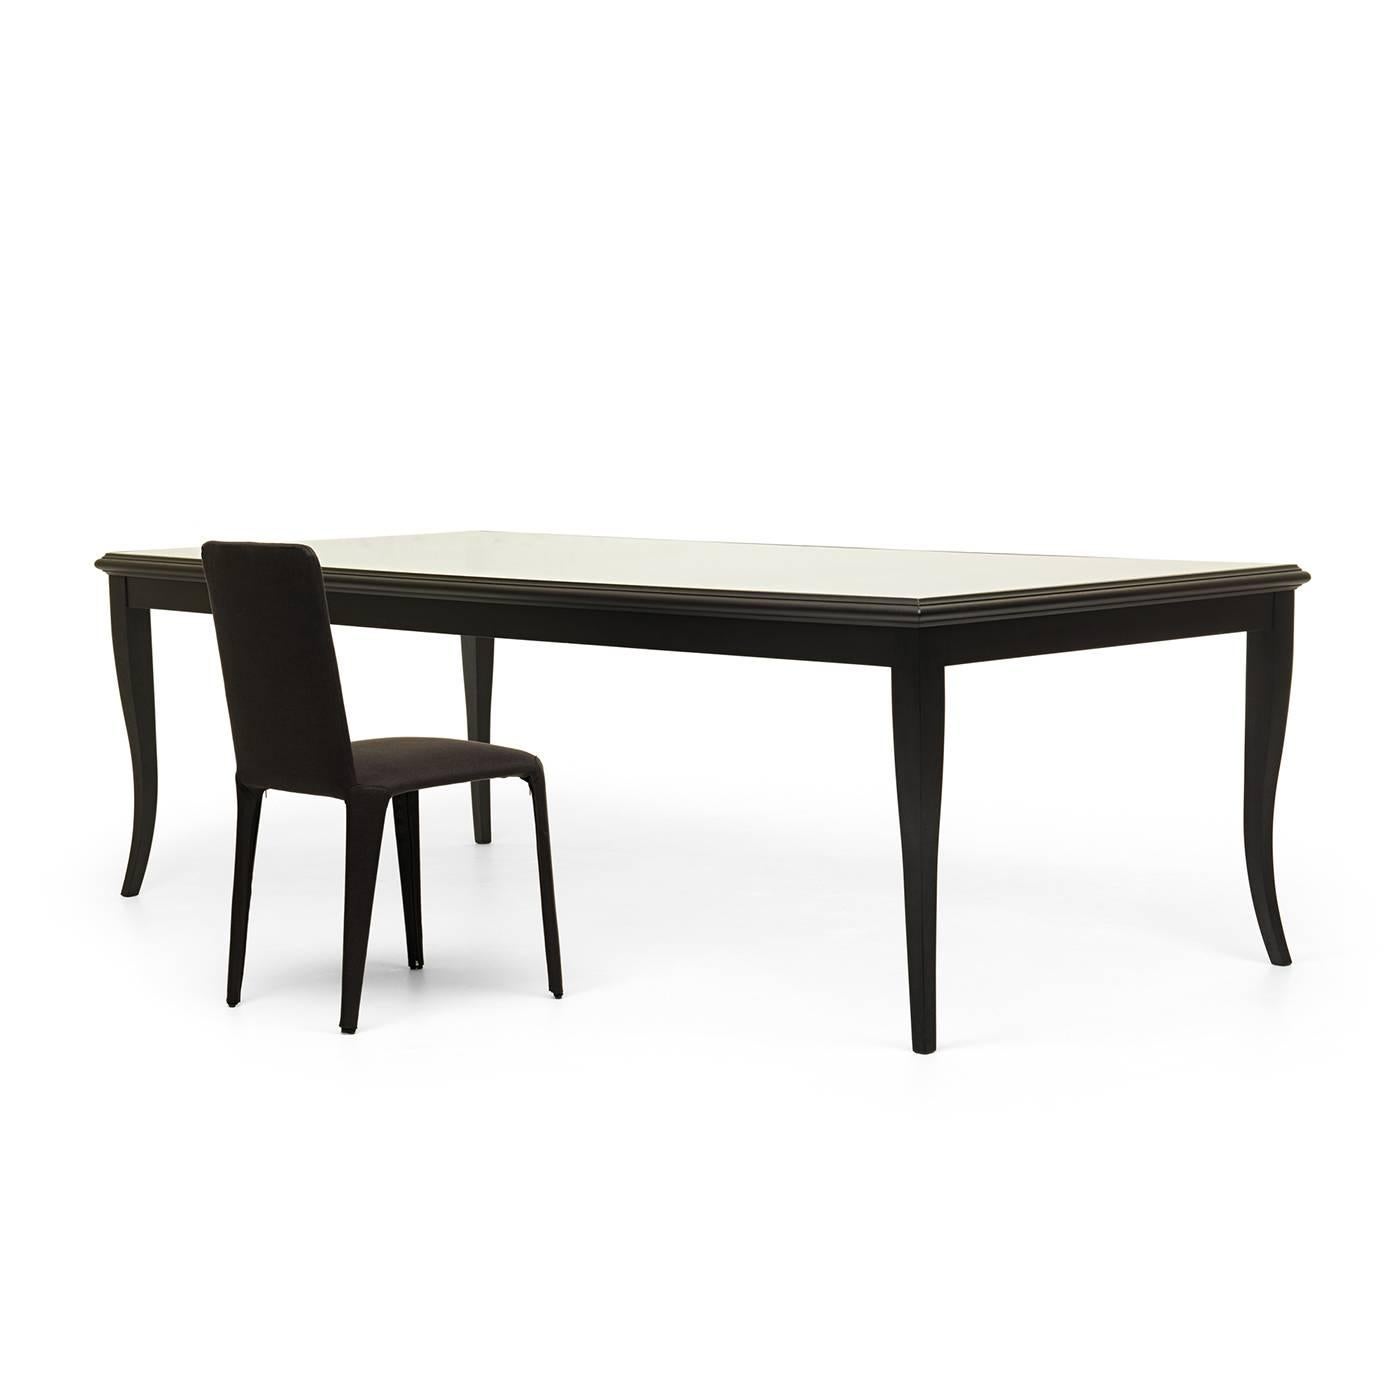 Designed in 2013 by Federico Carandini, this elegant dining table reinterprets the silhouette of an antique table with a contemporary sensibility, creating a light, sophisticated piece that will complement any decor. The tempered glass top showcases